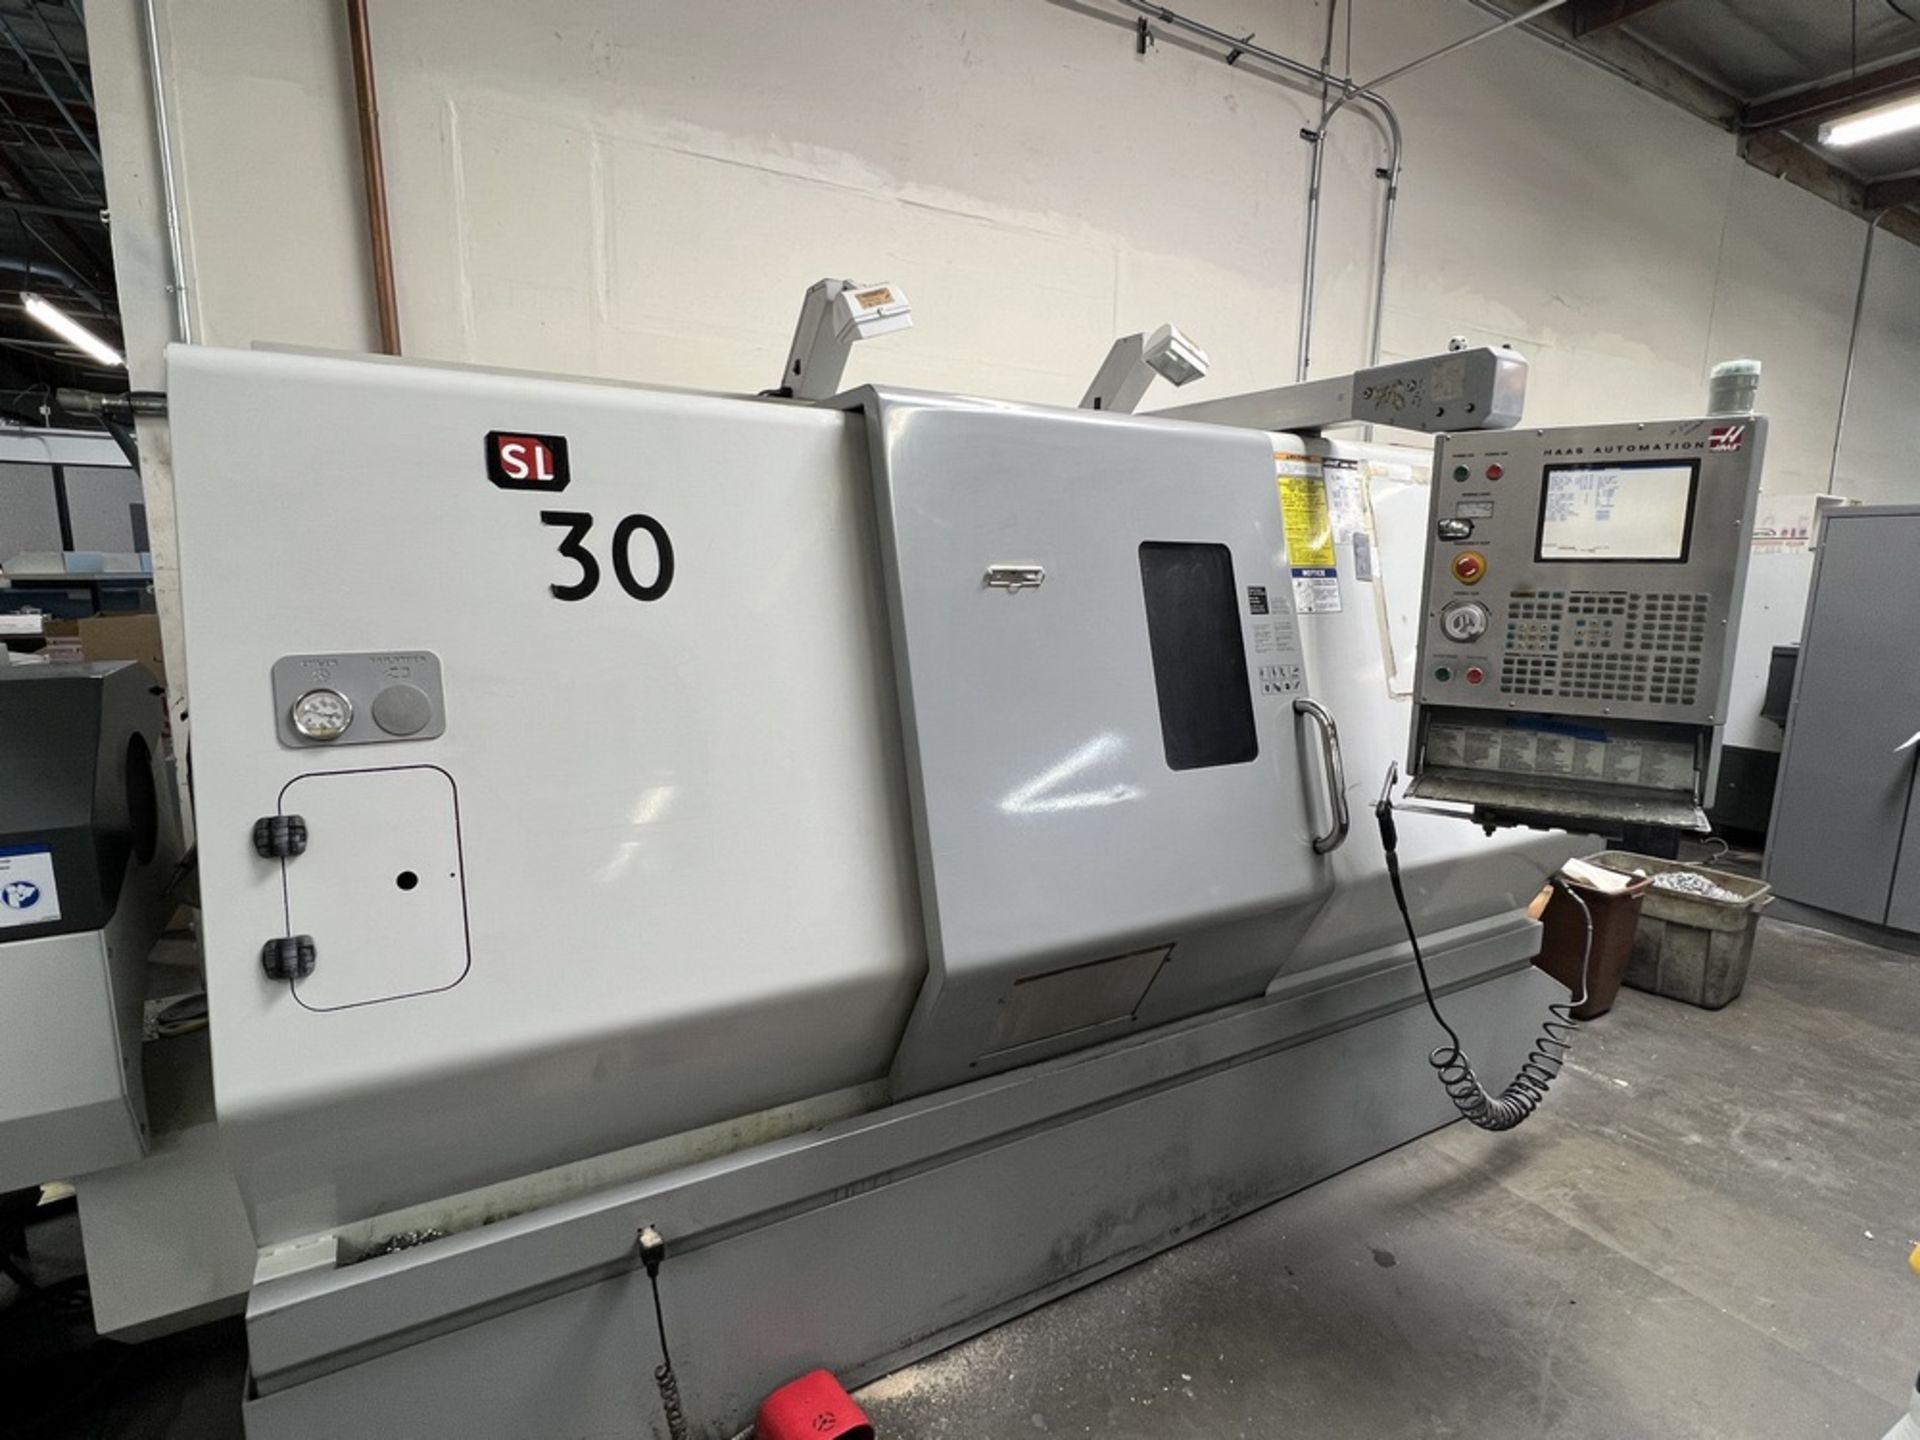 2006 Haas SL-30, CNC Lathe, Live Milling, 12 Station Turret, 10" 3 Jaw Chuck Tool Presetter, Chip - Image 2 of 28